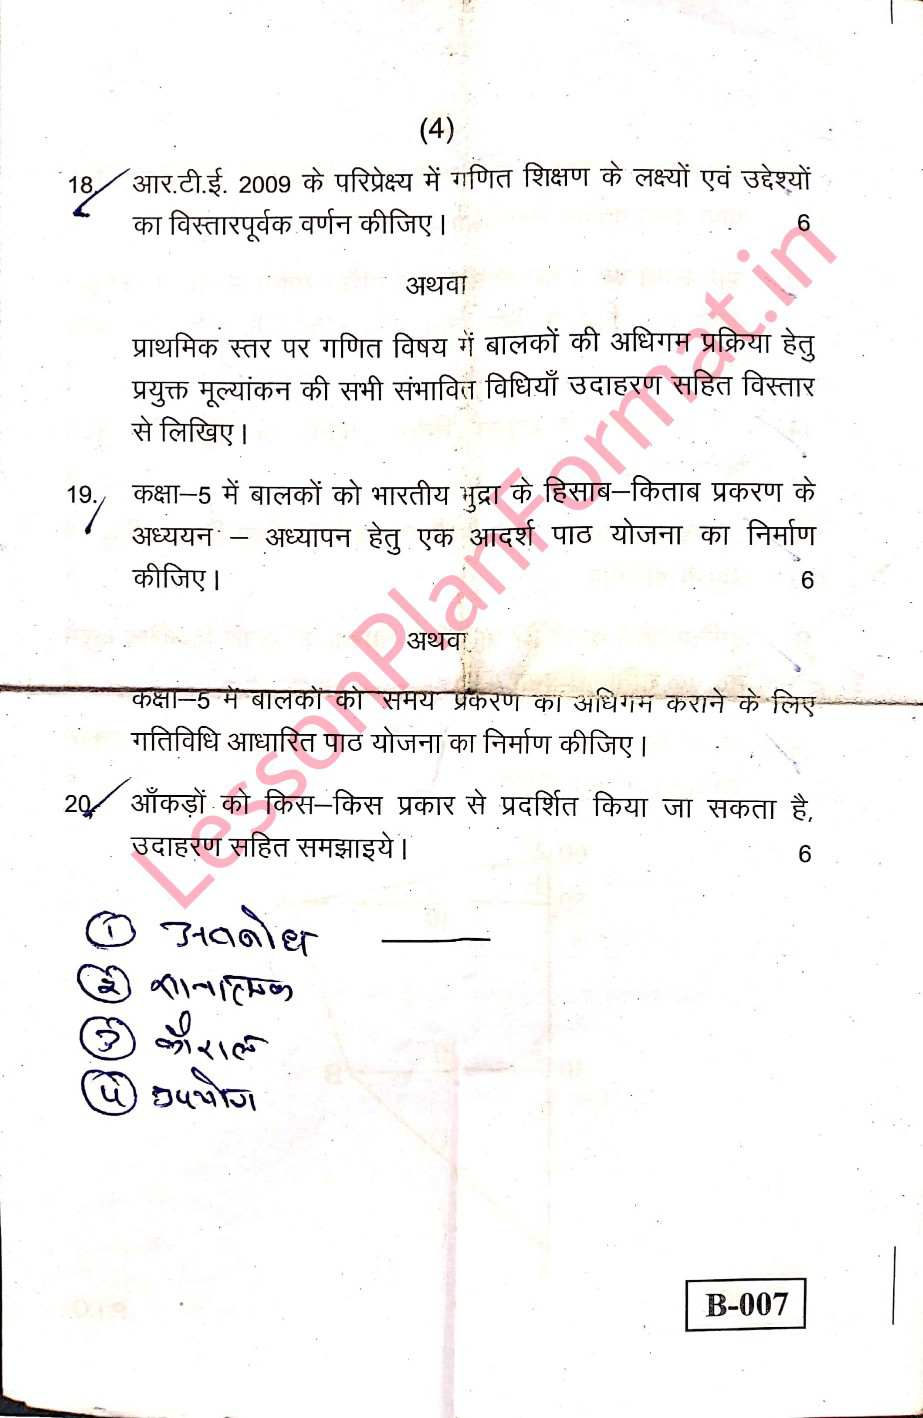 D El Ed First Year Old Question Paper 2017